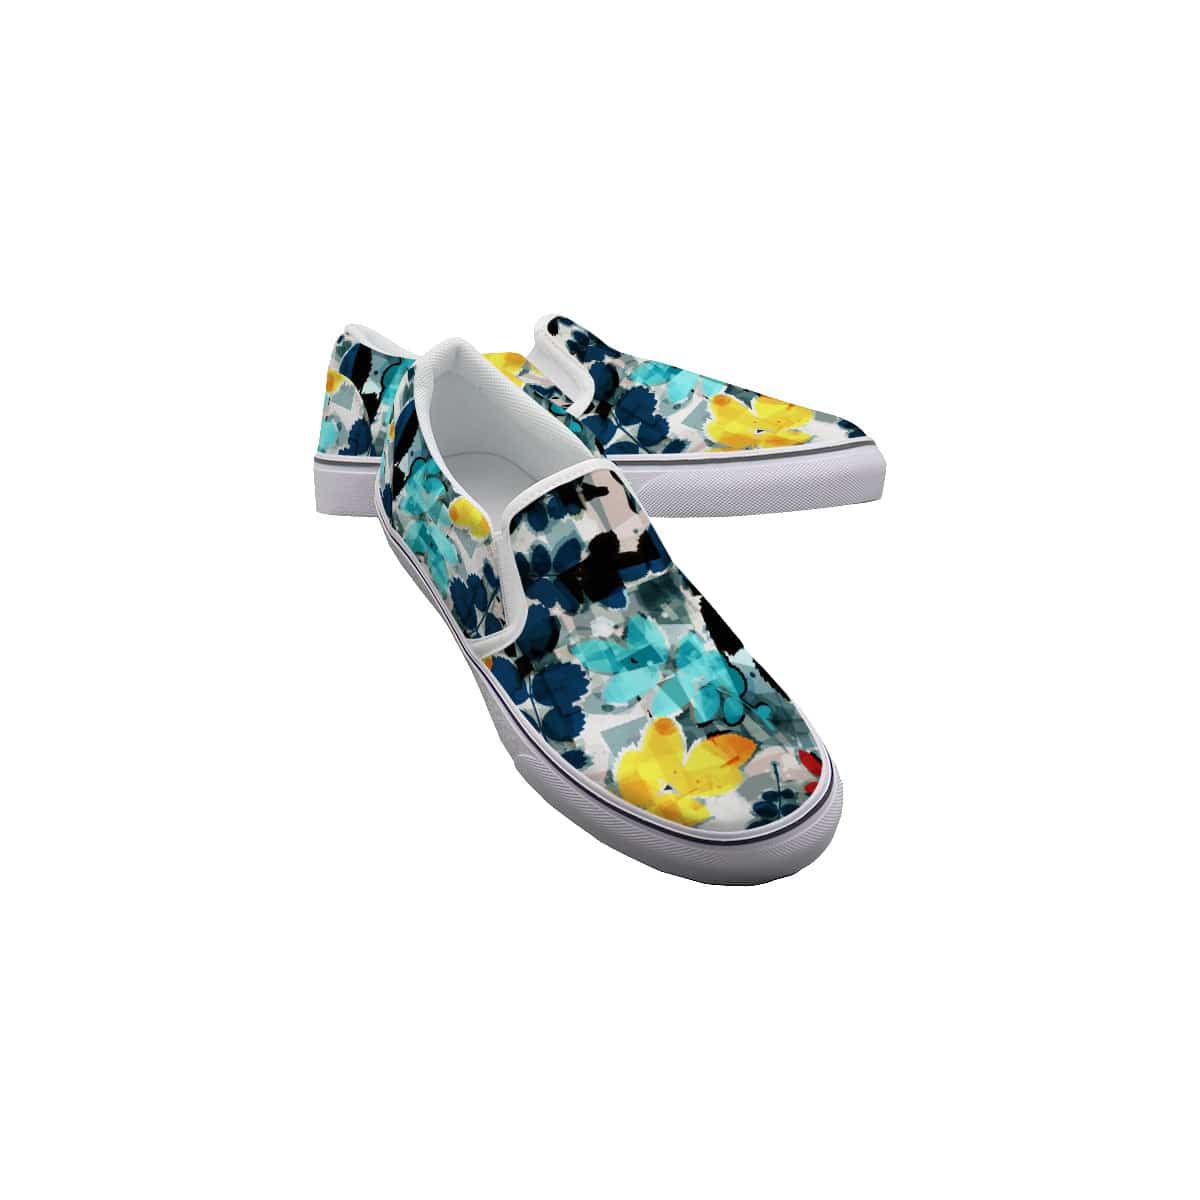 Yoycol White / US6(EUR36) Painted Flora - Women's Slip On Sneakers